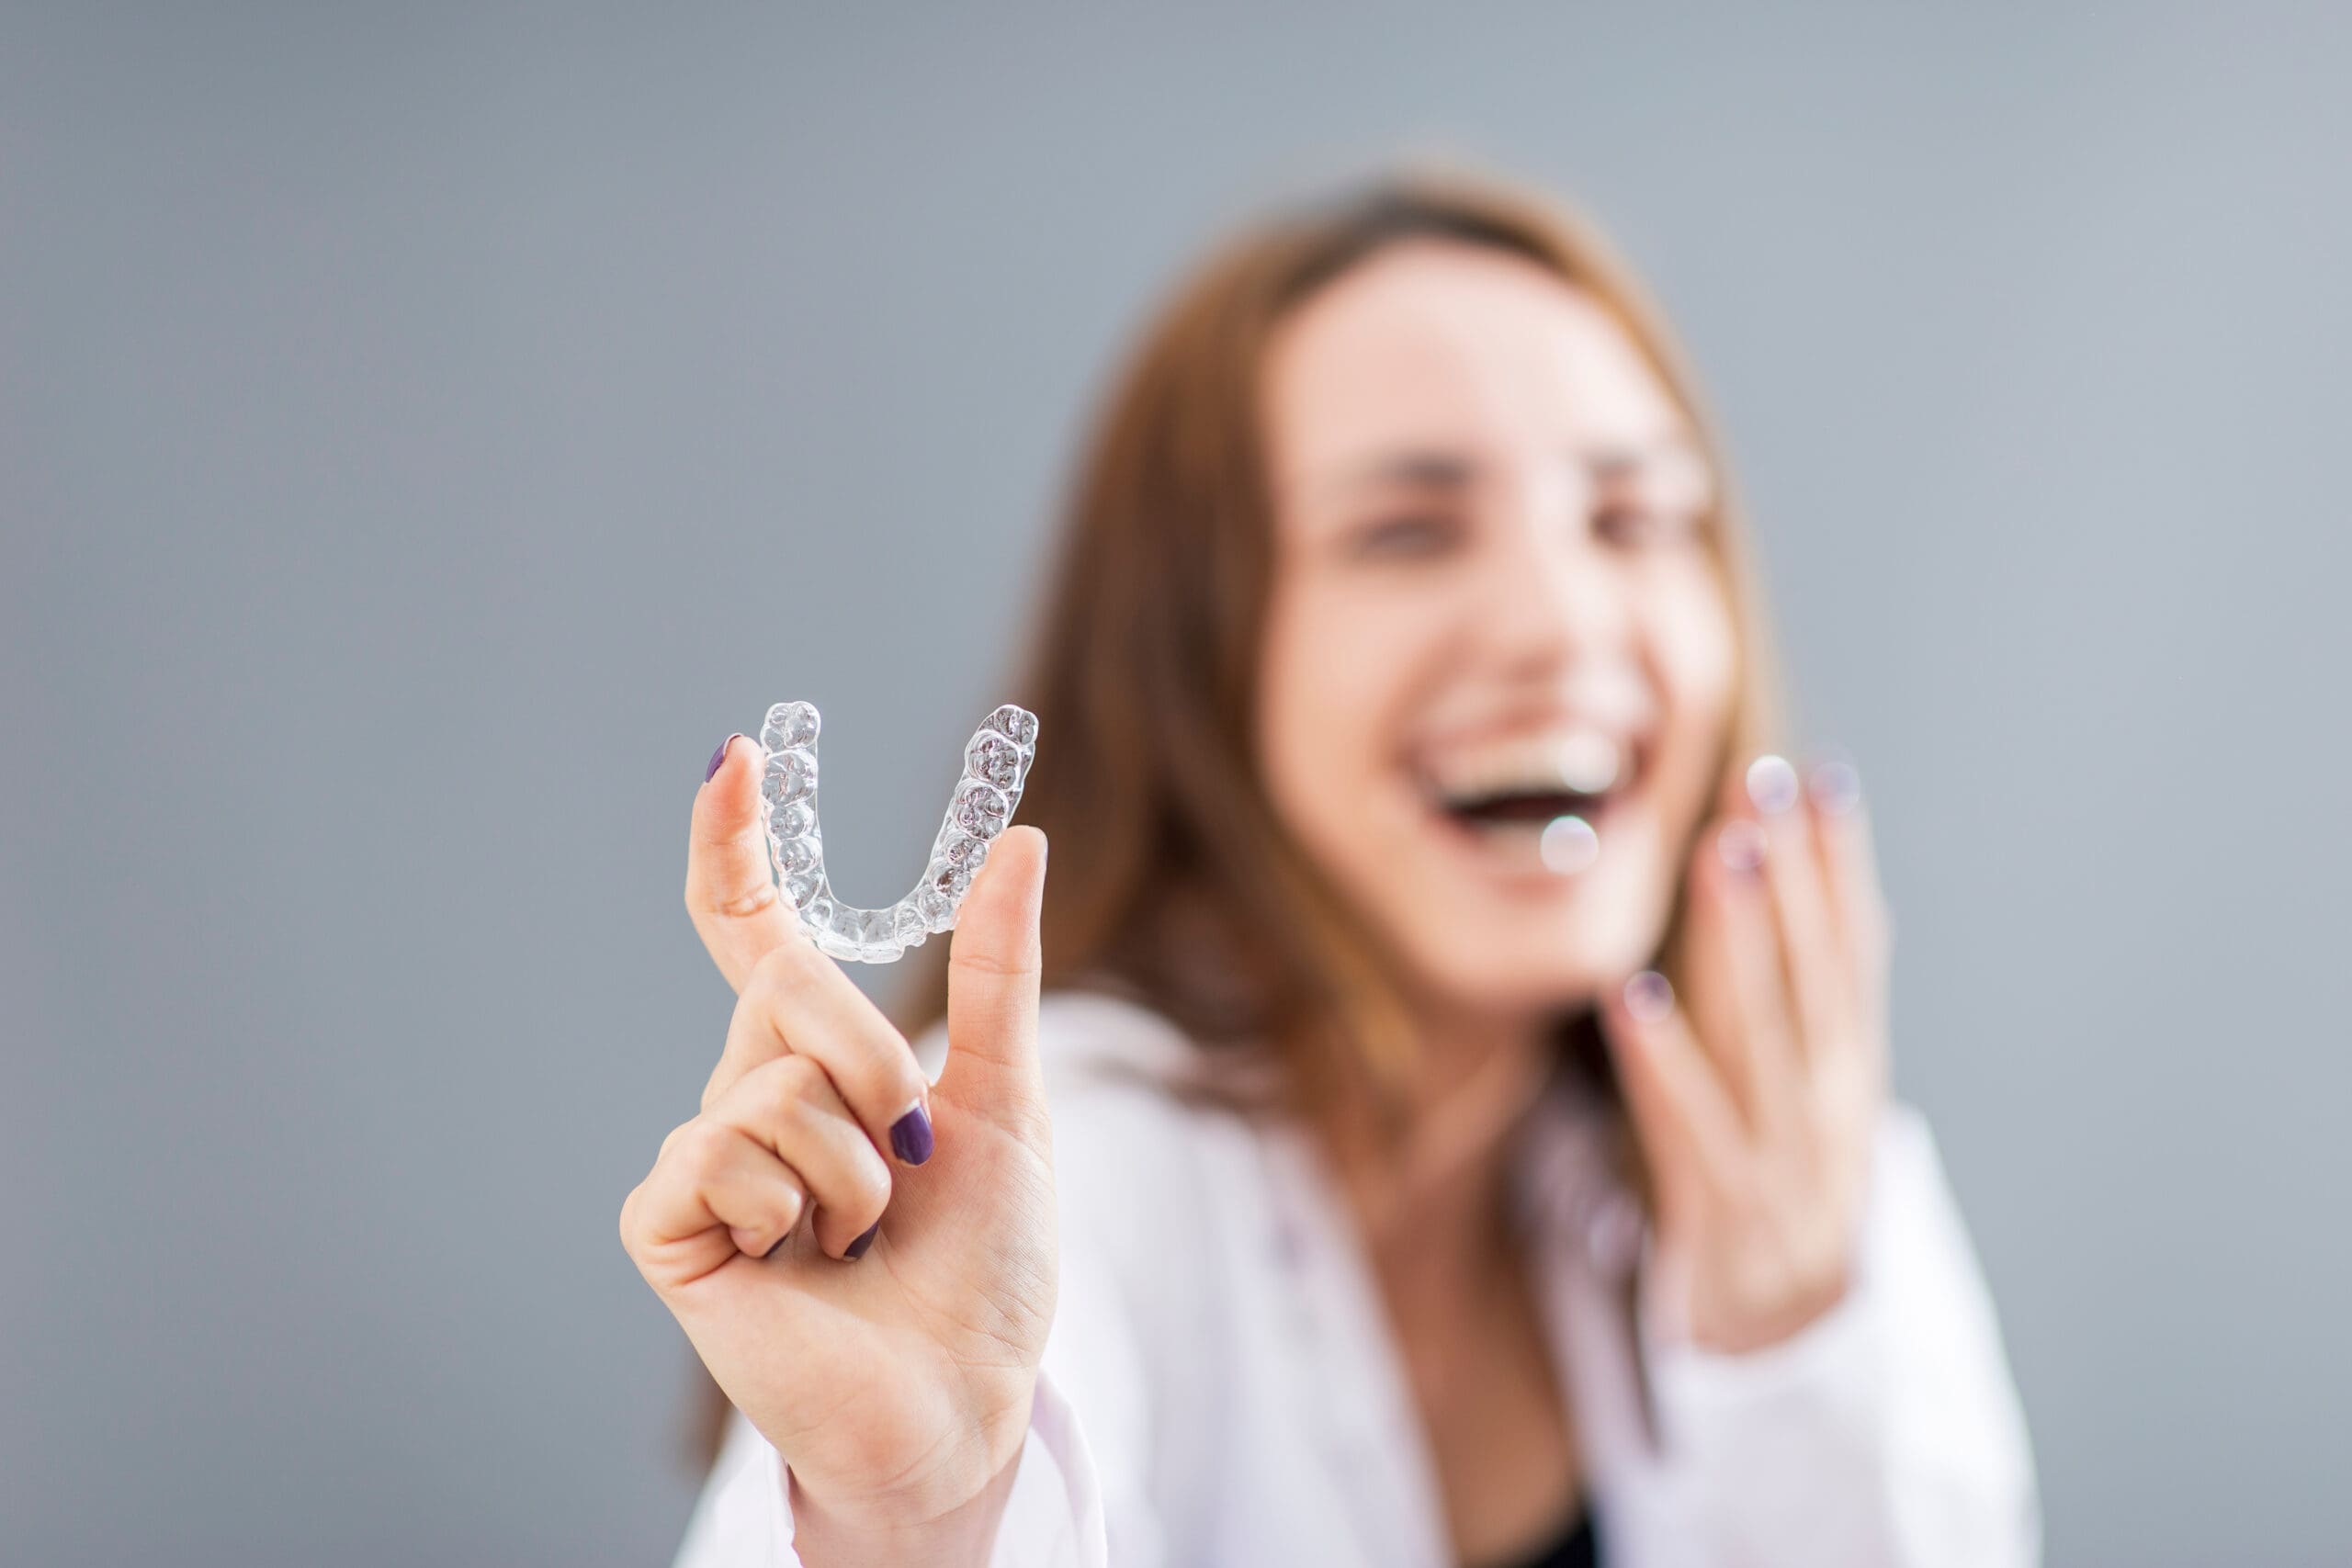 A woman is holding an orthodontic aligner in front of her face.